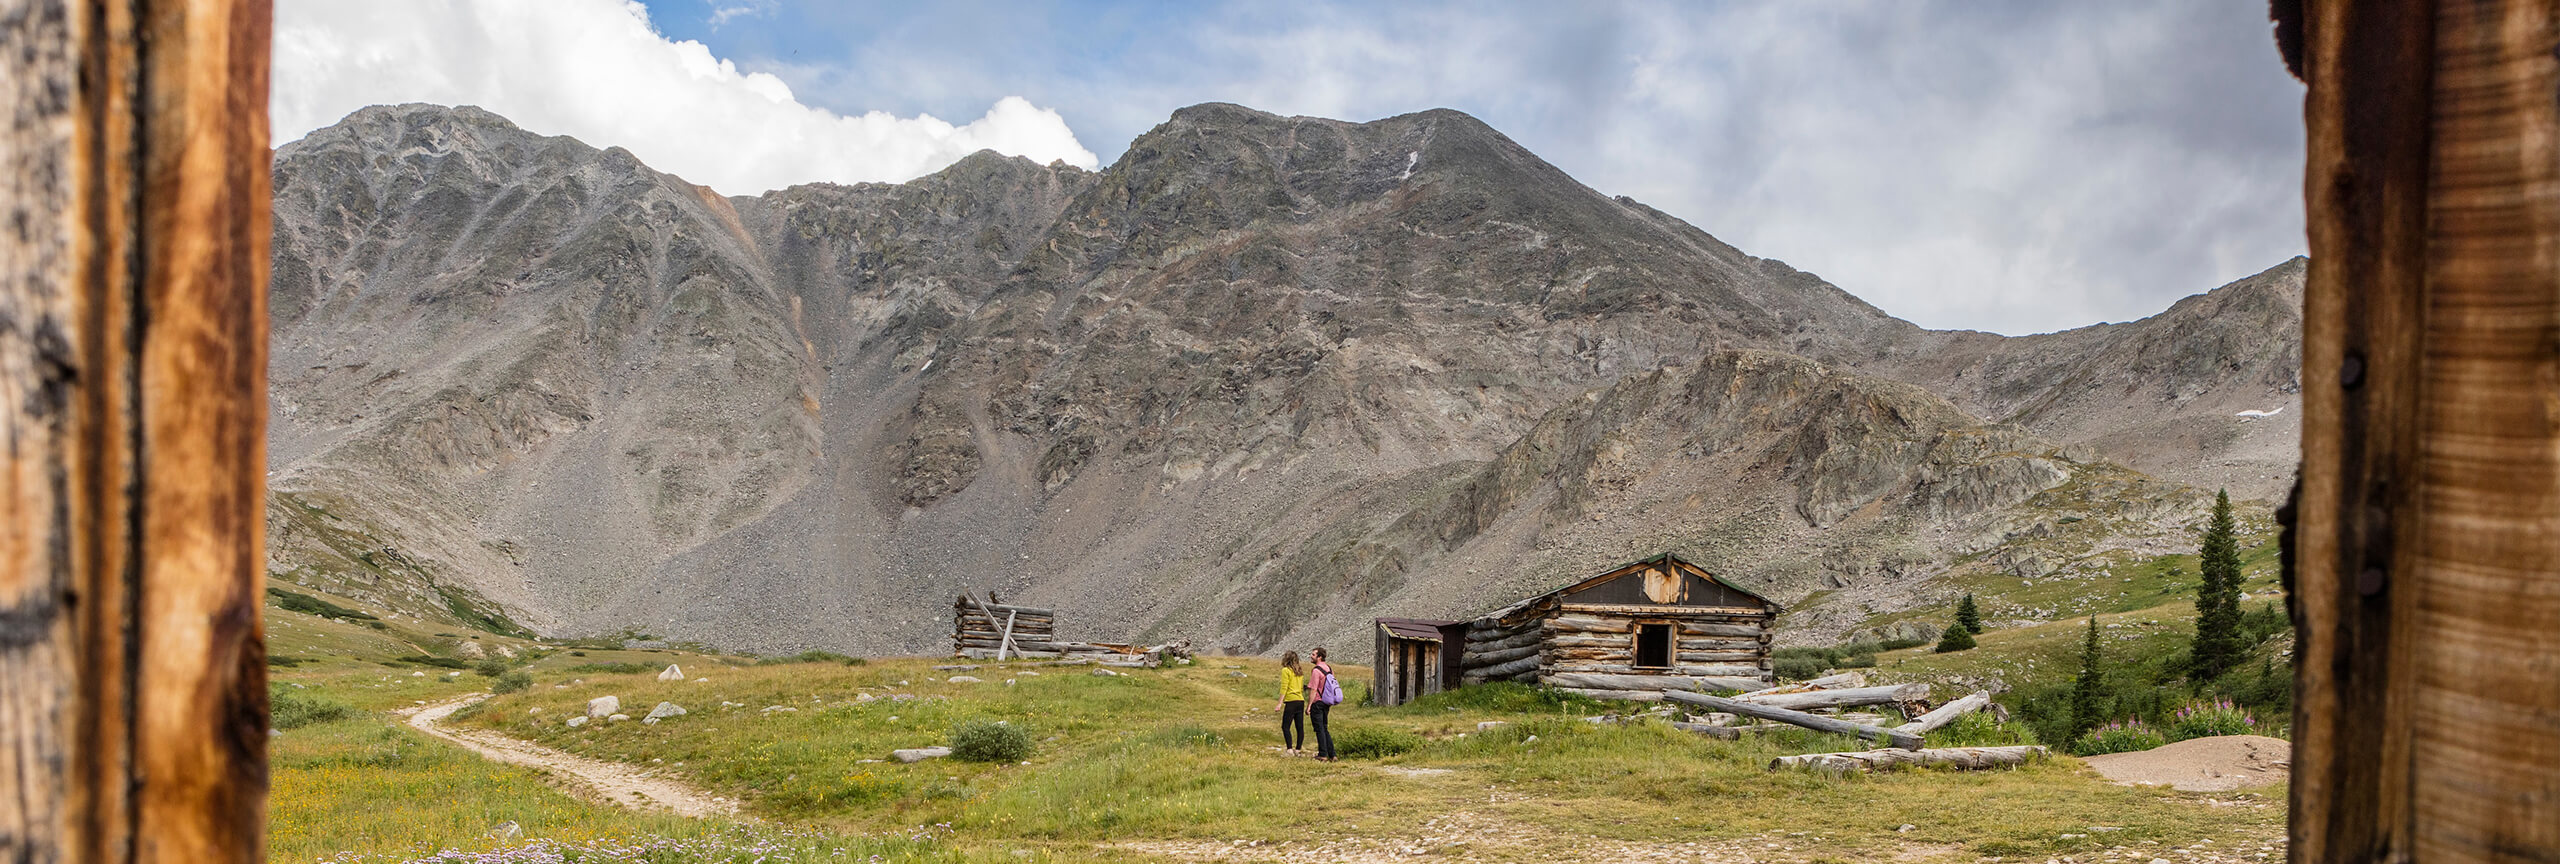 Man and woman hiking on trail near old building at Mayflower Gulch